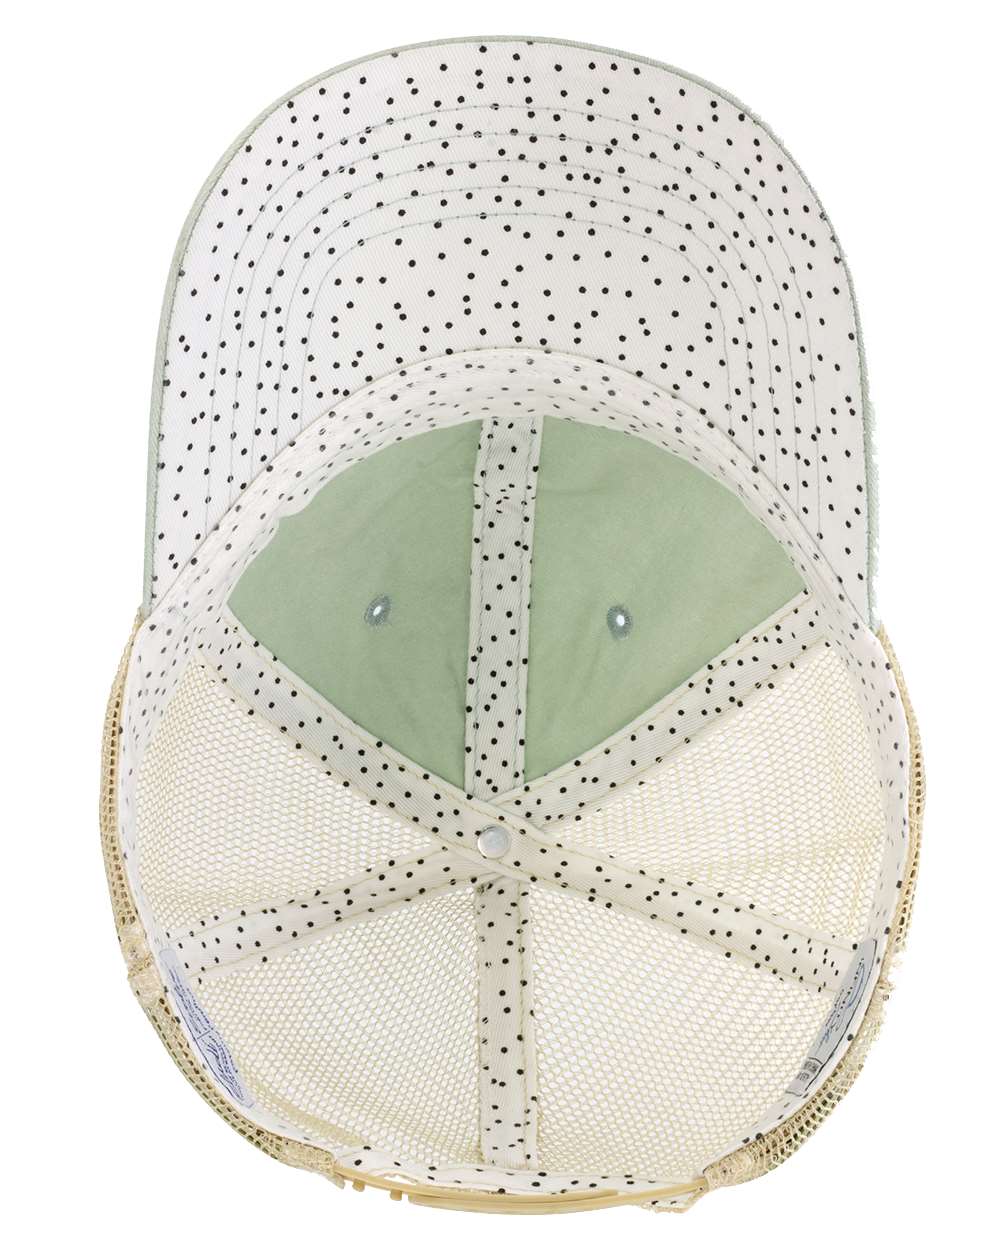 A women's washed mesh-back cap in sage green with polka dot pattern on the front panel.